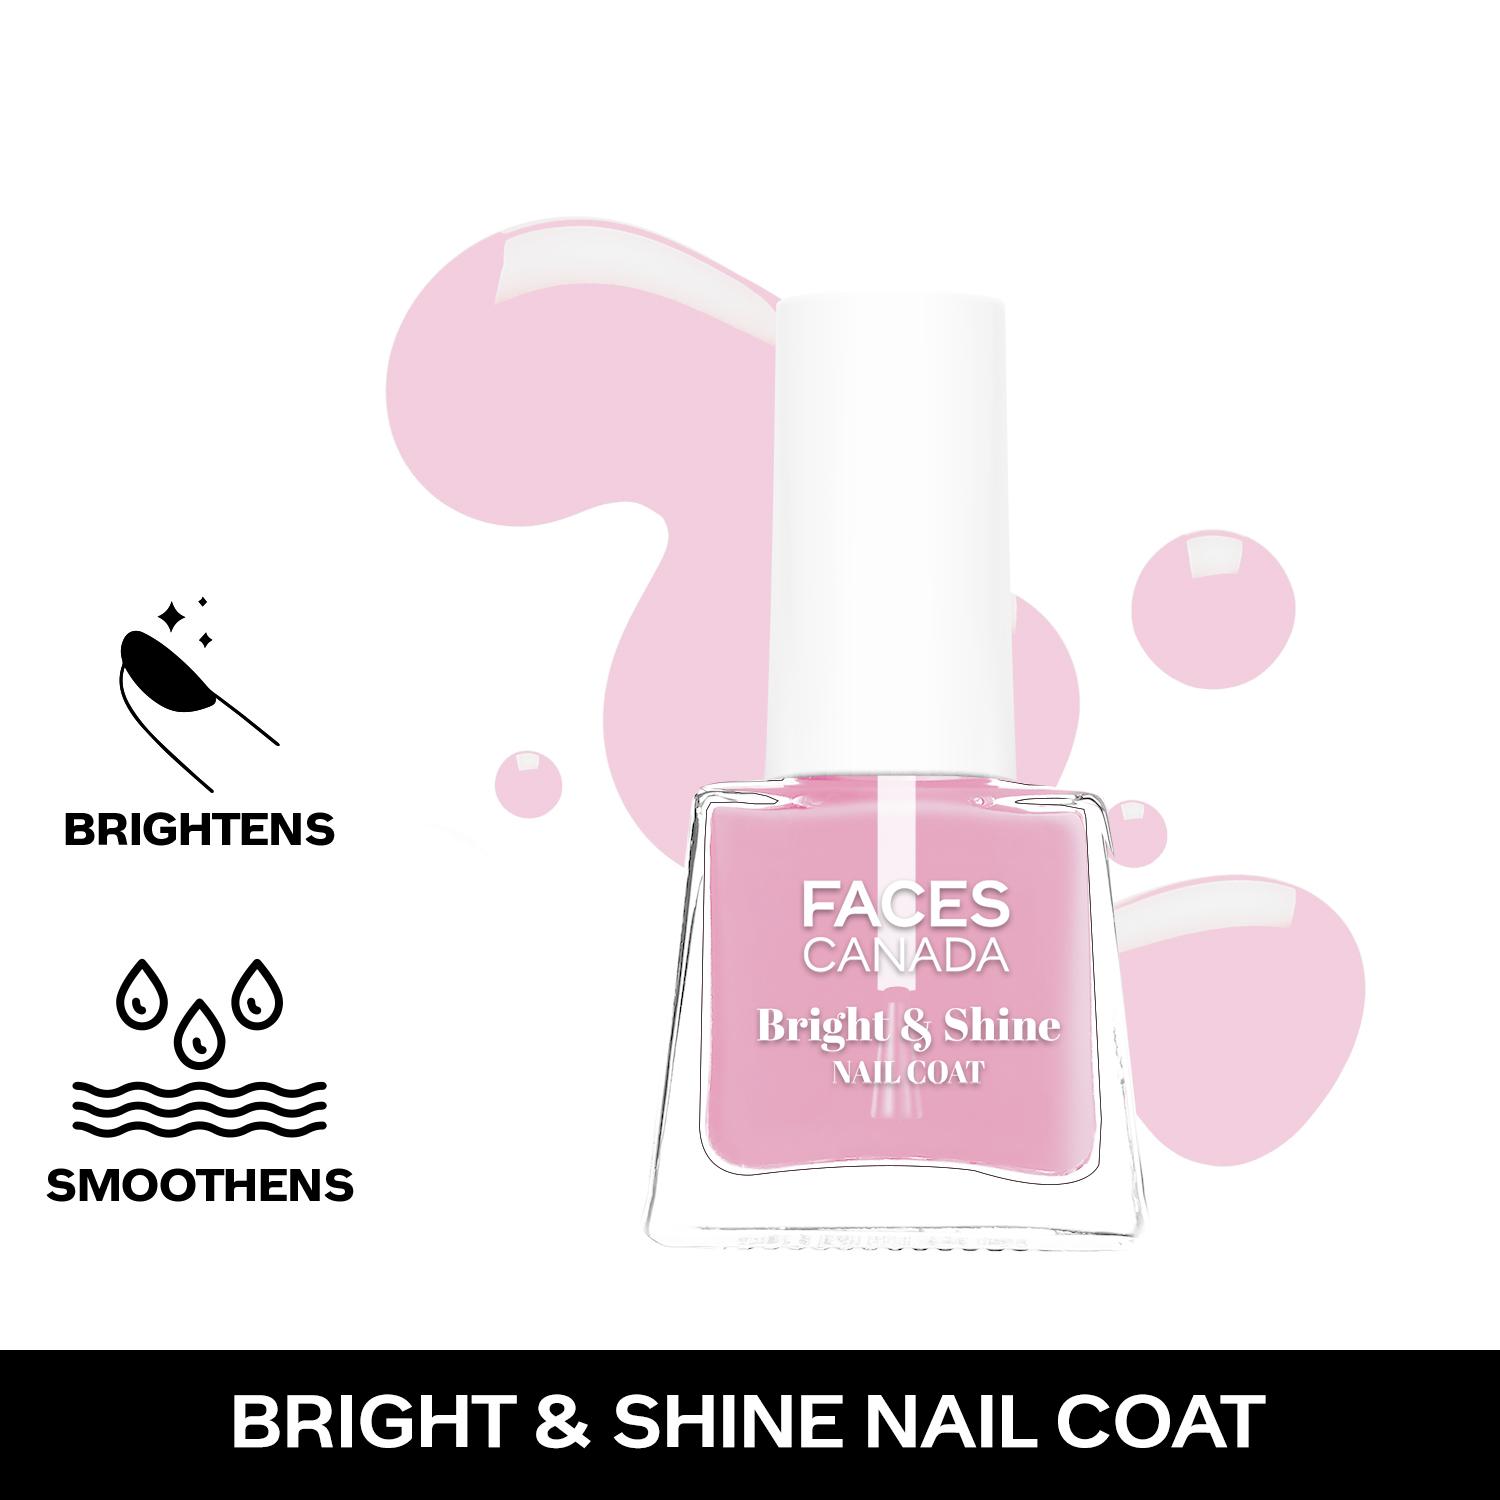 Faces Canada | Faces Canada Bright & Shine Nail Coat, Protects & Strengthens Nails, Camellia Oil (5 ml)